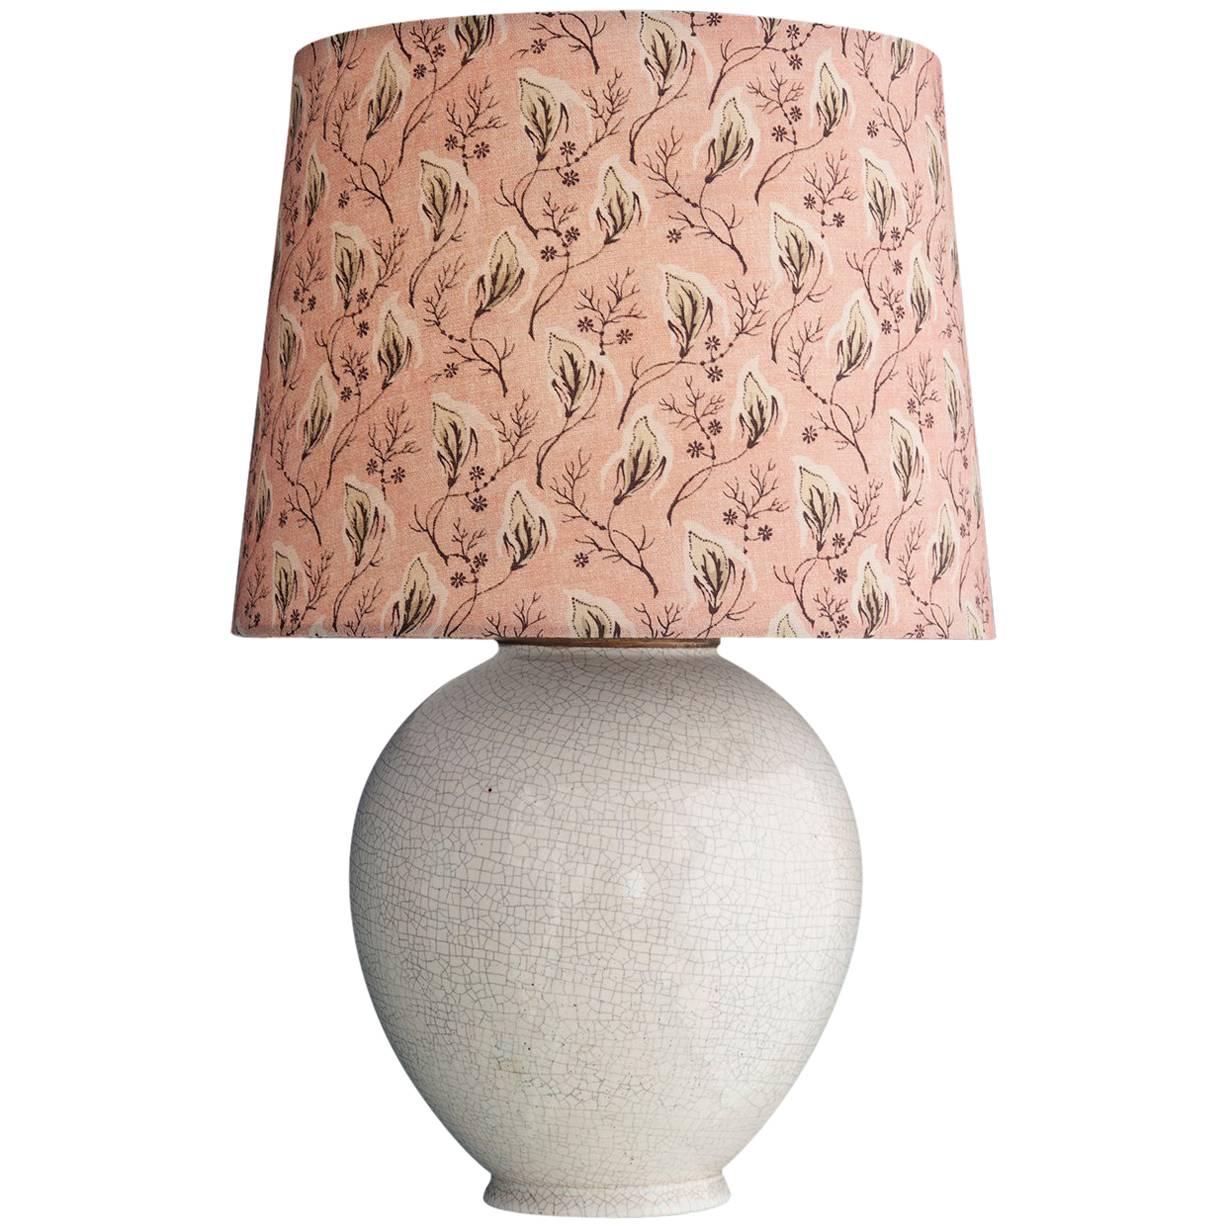 Vintage French Ceramic Table Lamp